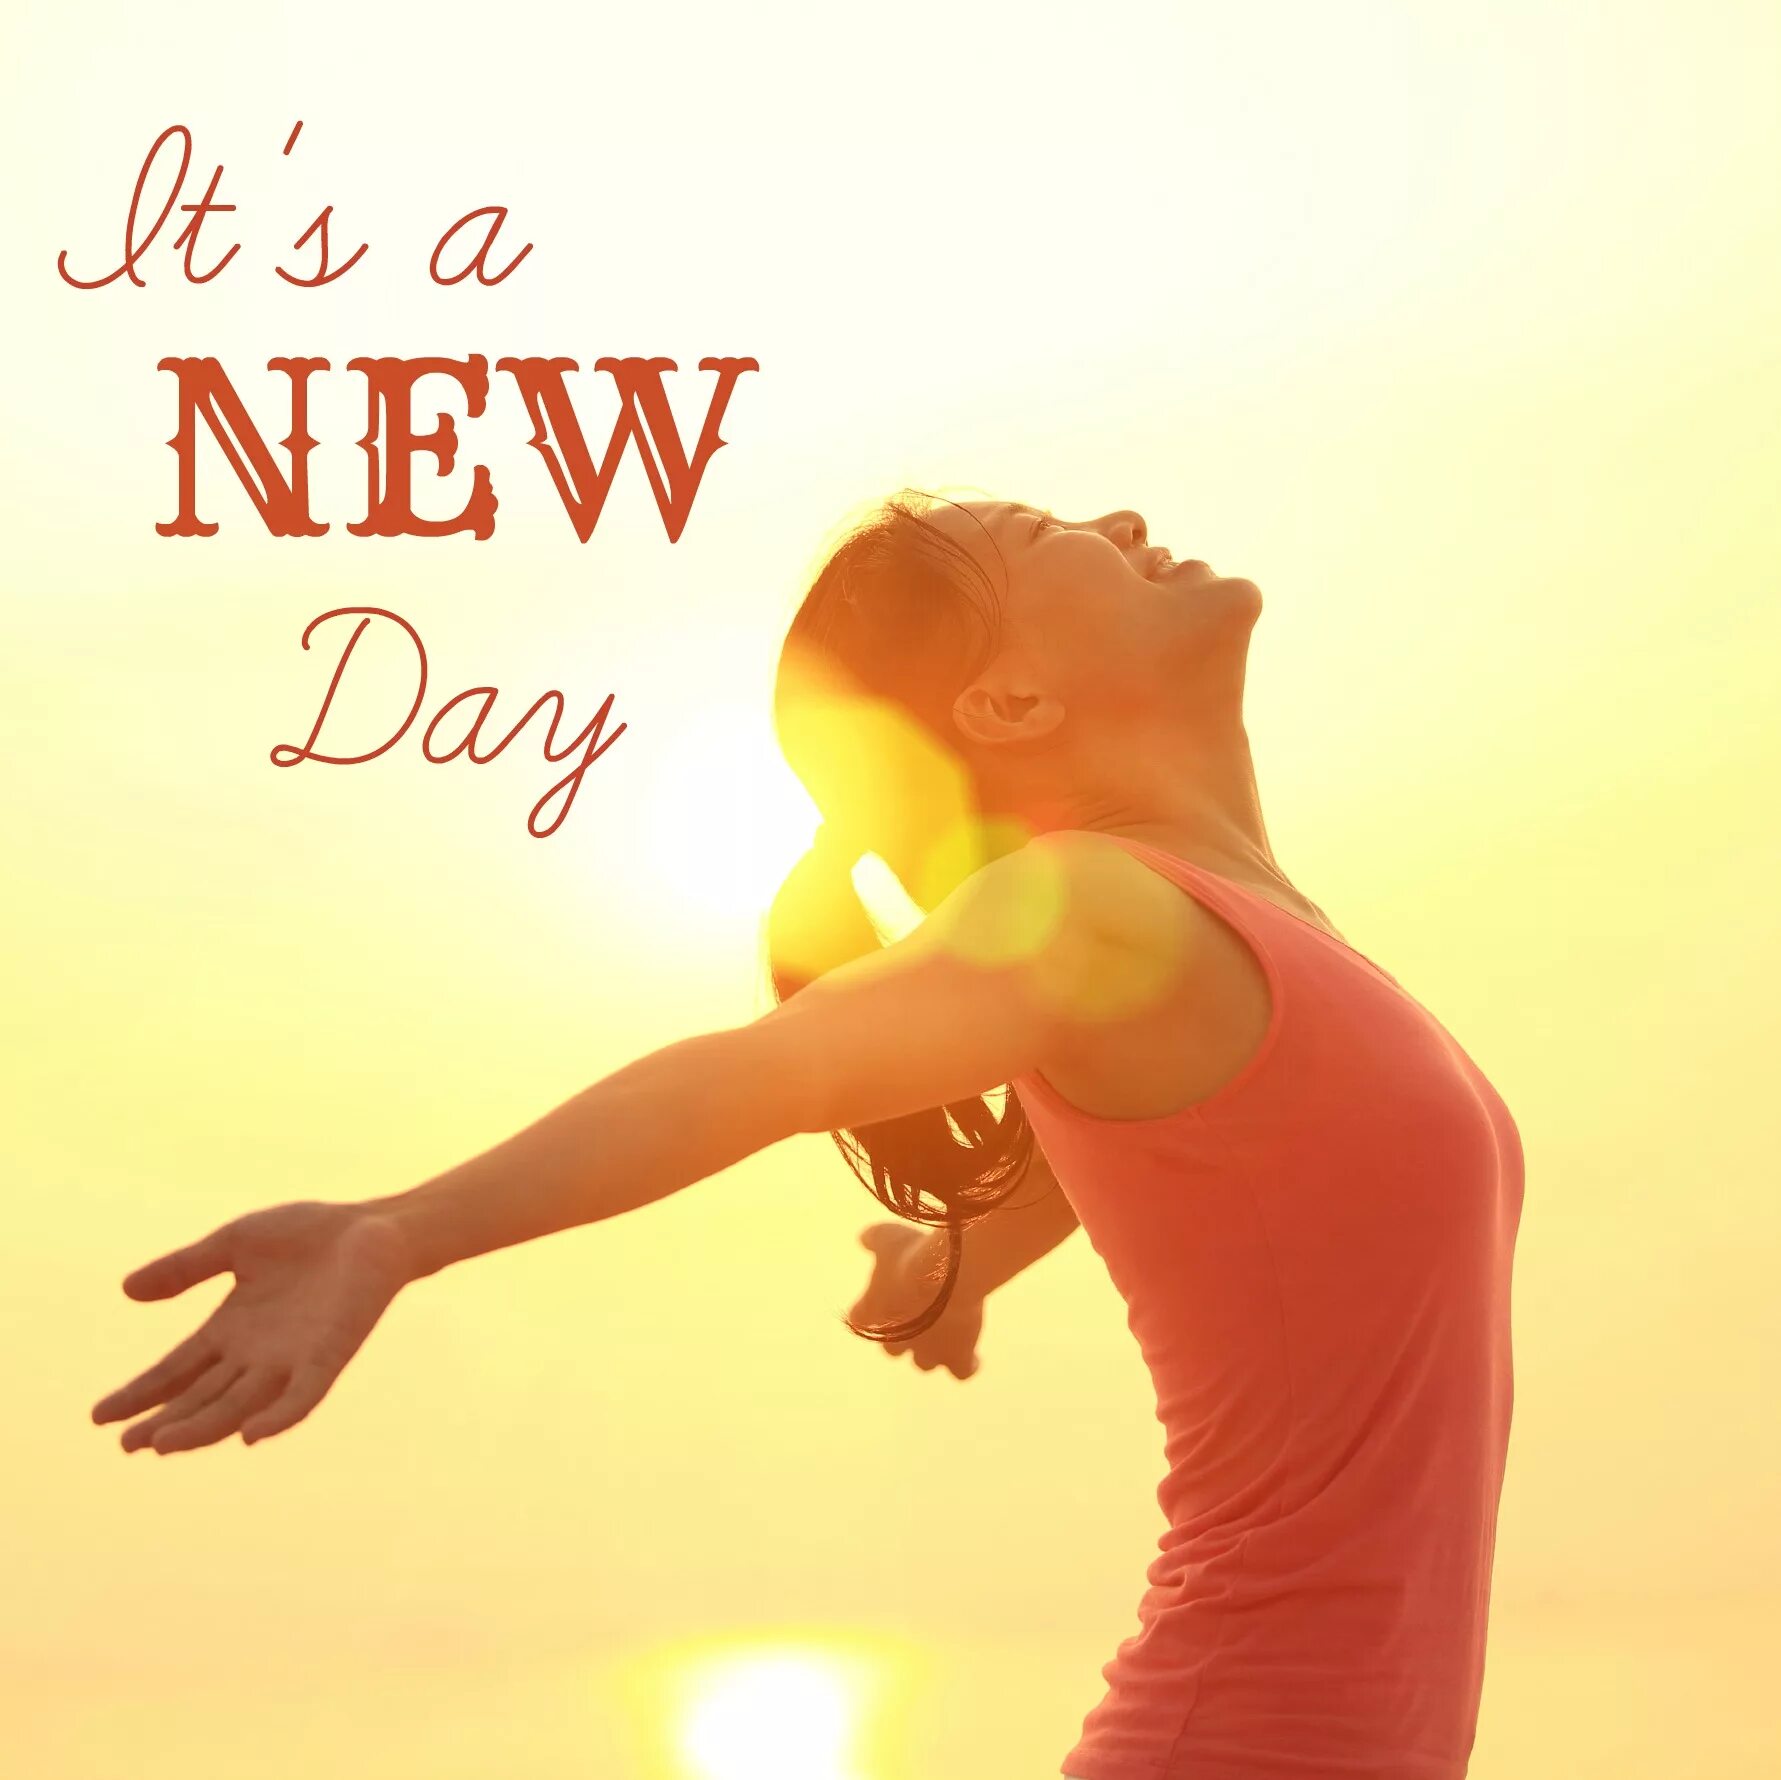 New week. New week New. Happy New Day картинки. It’s a New Day..